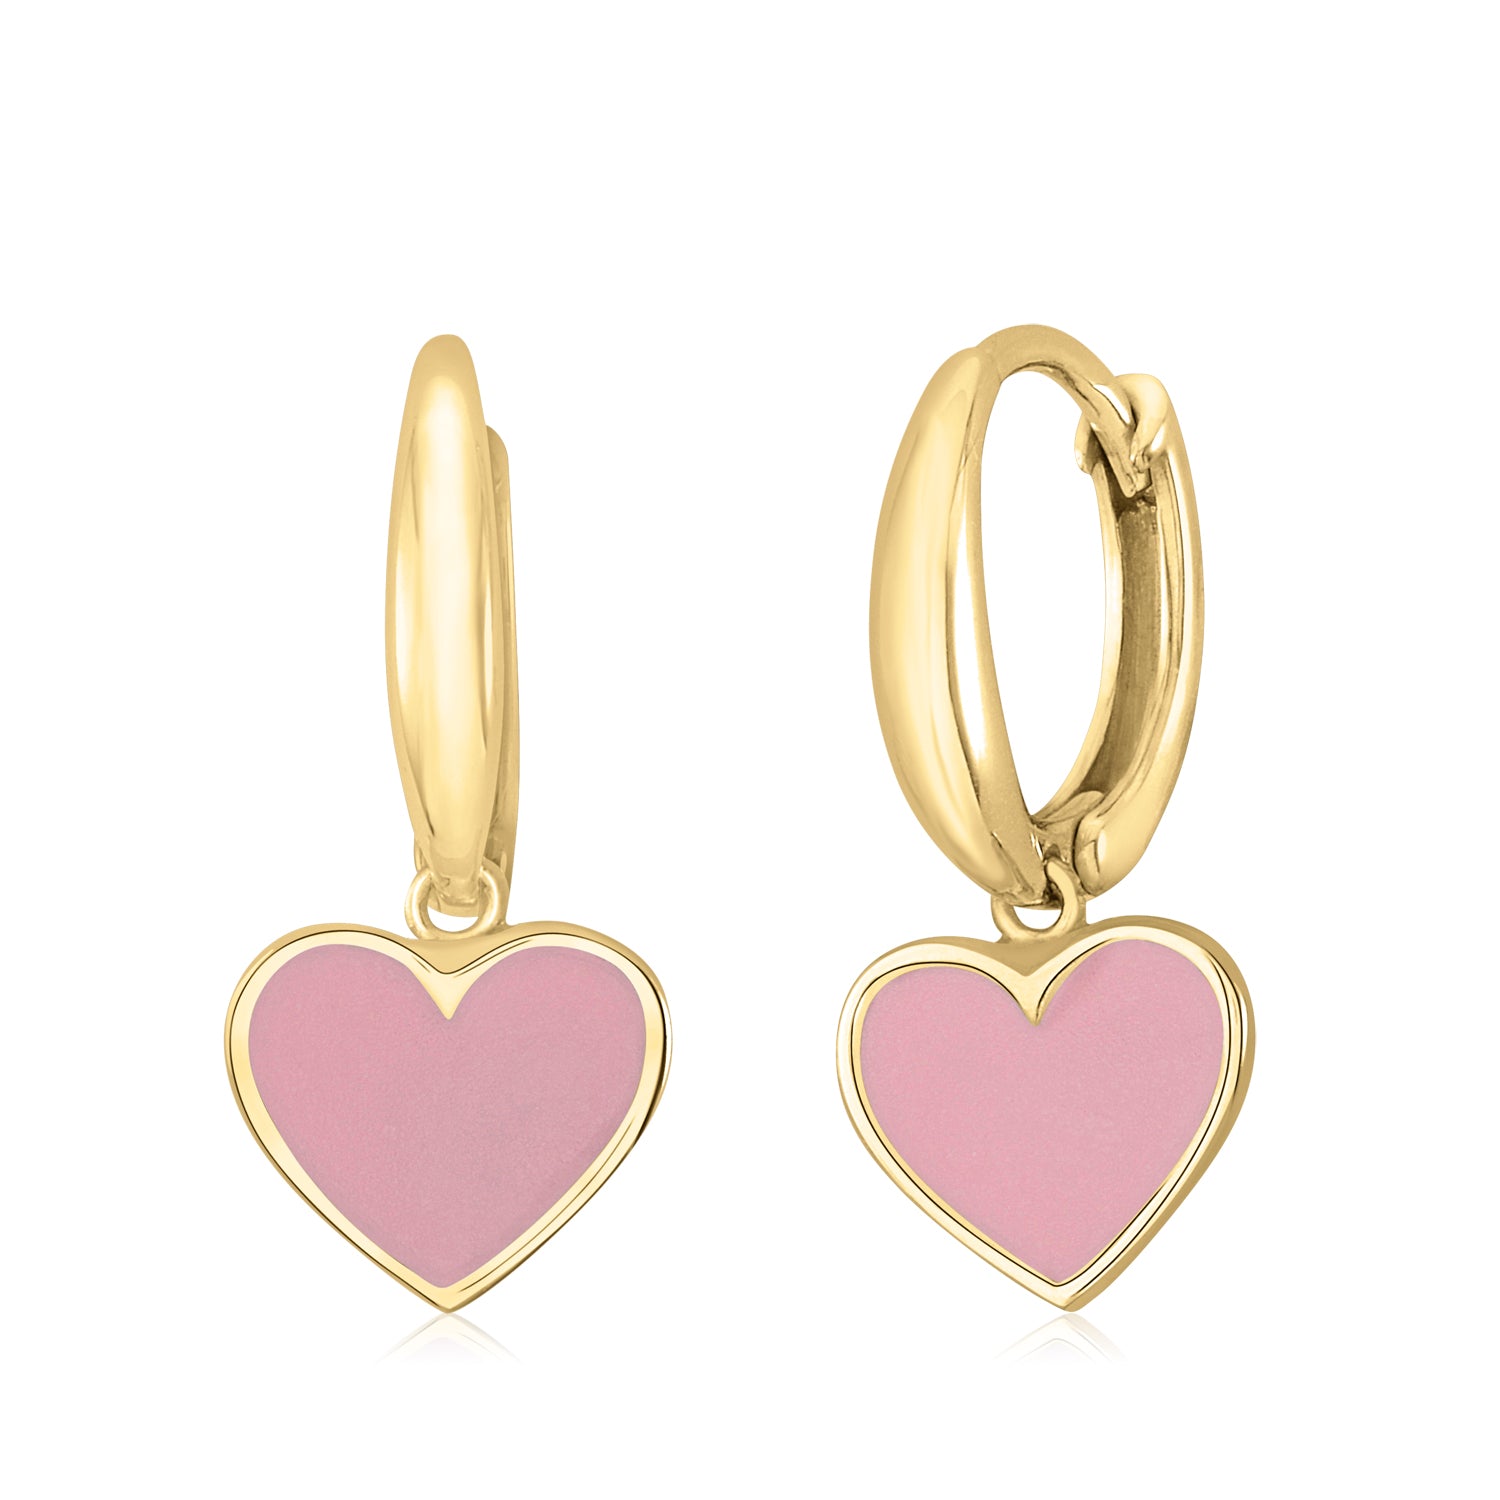 14K White or Yellow Gold Large Heart Dangle Leverback Earrings with Light Blue Light Pink and Dark Pink Enamel